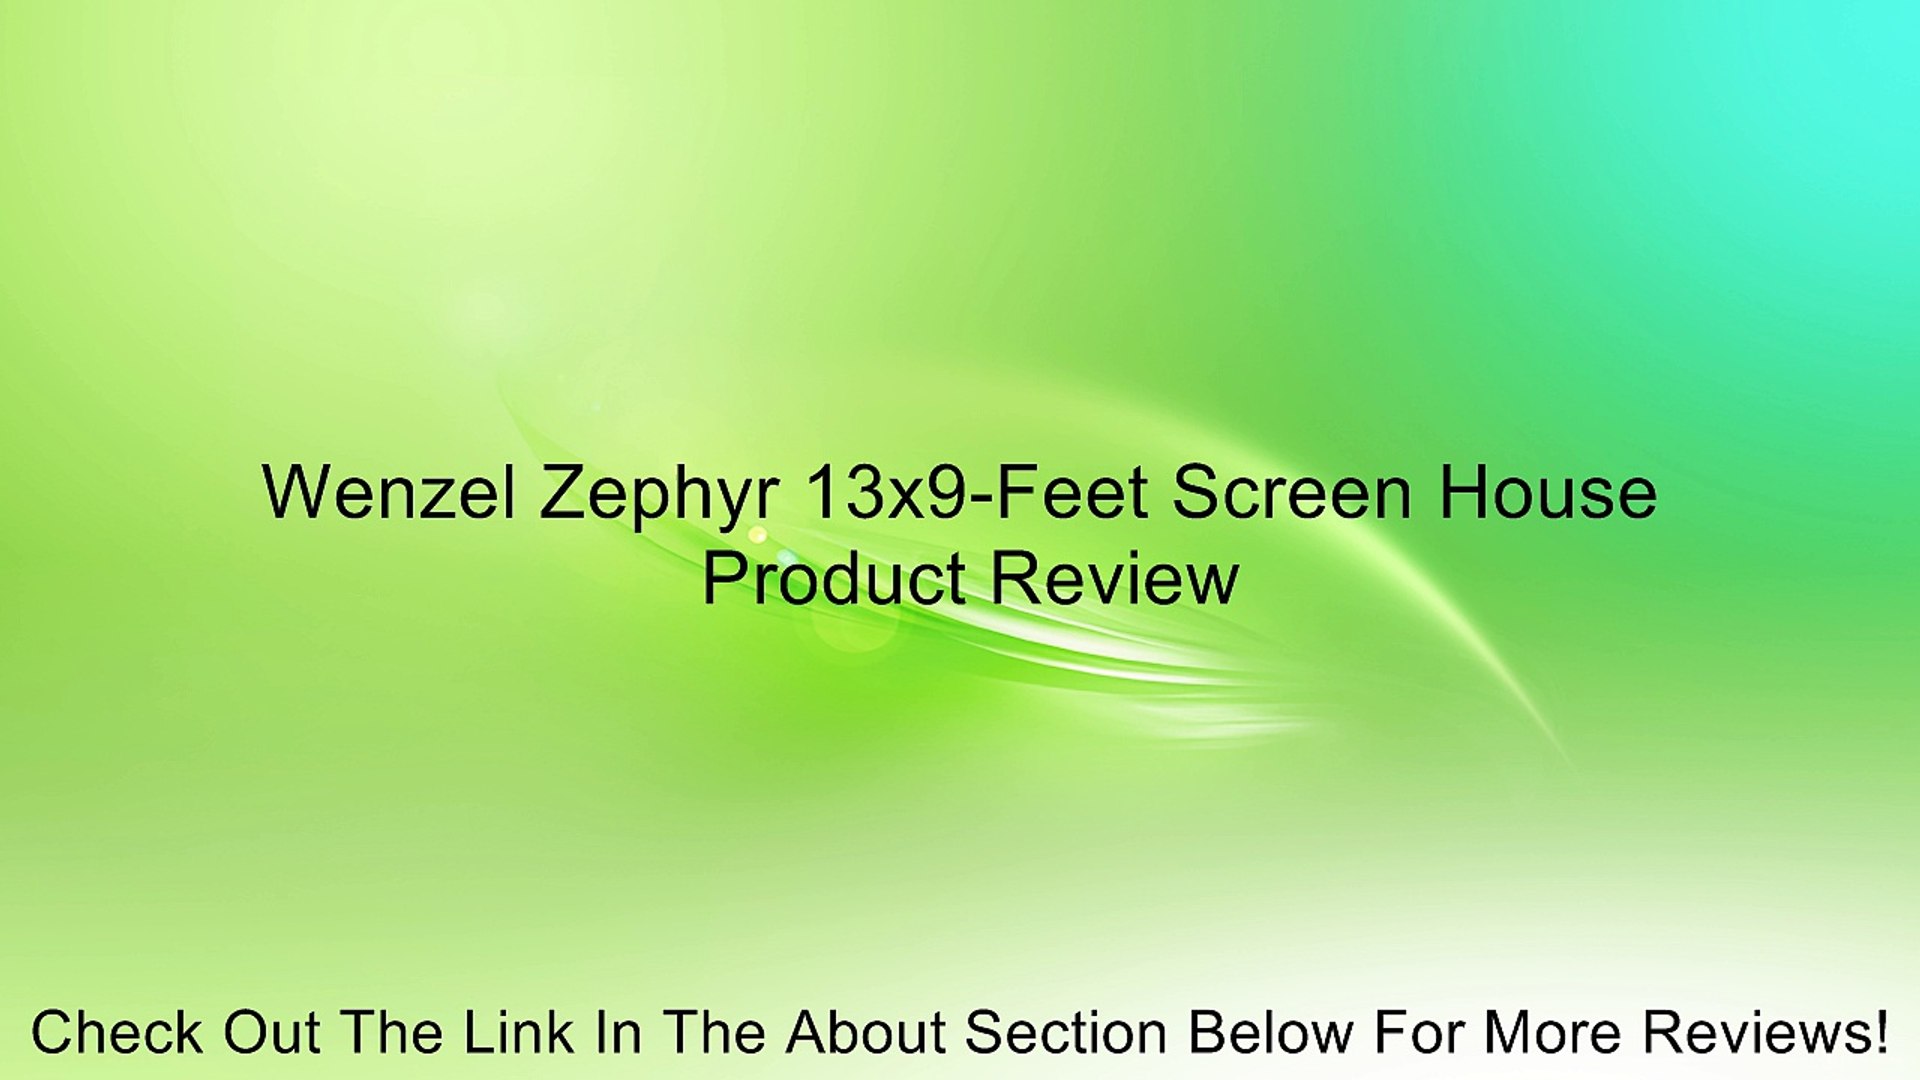 Wenzel Zephyr 13x9-Feet Screen House Review - Vídeo Dailymotion